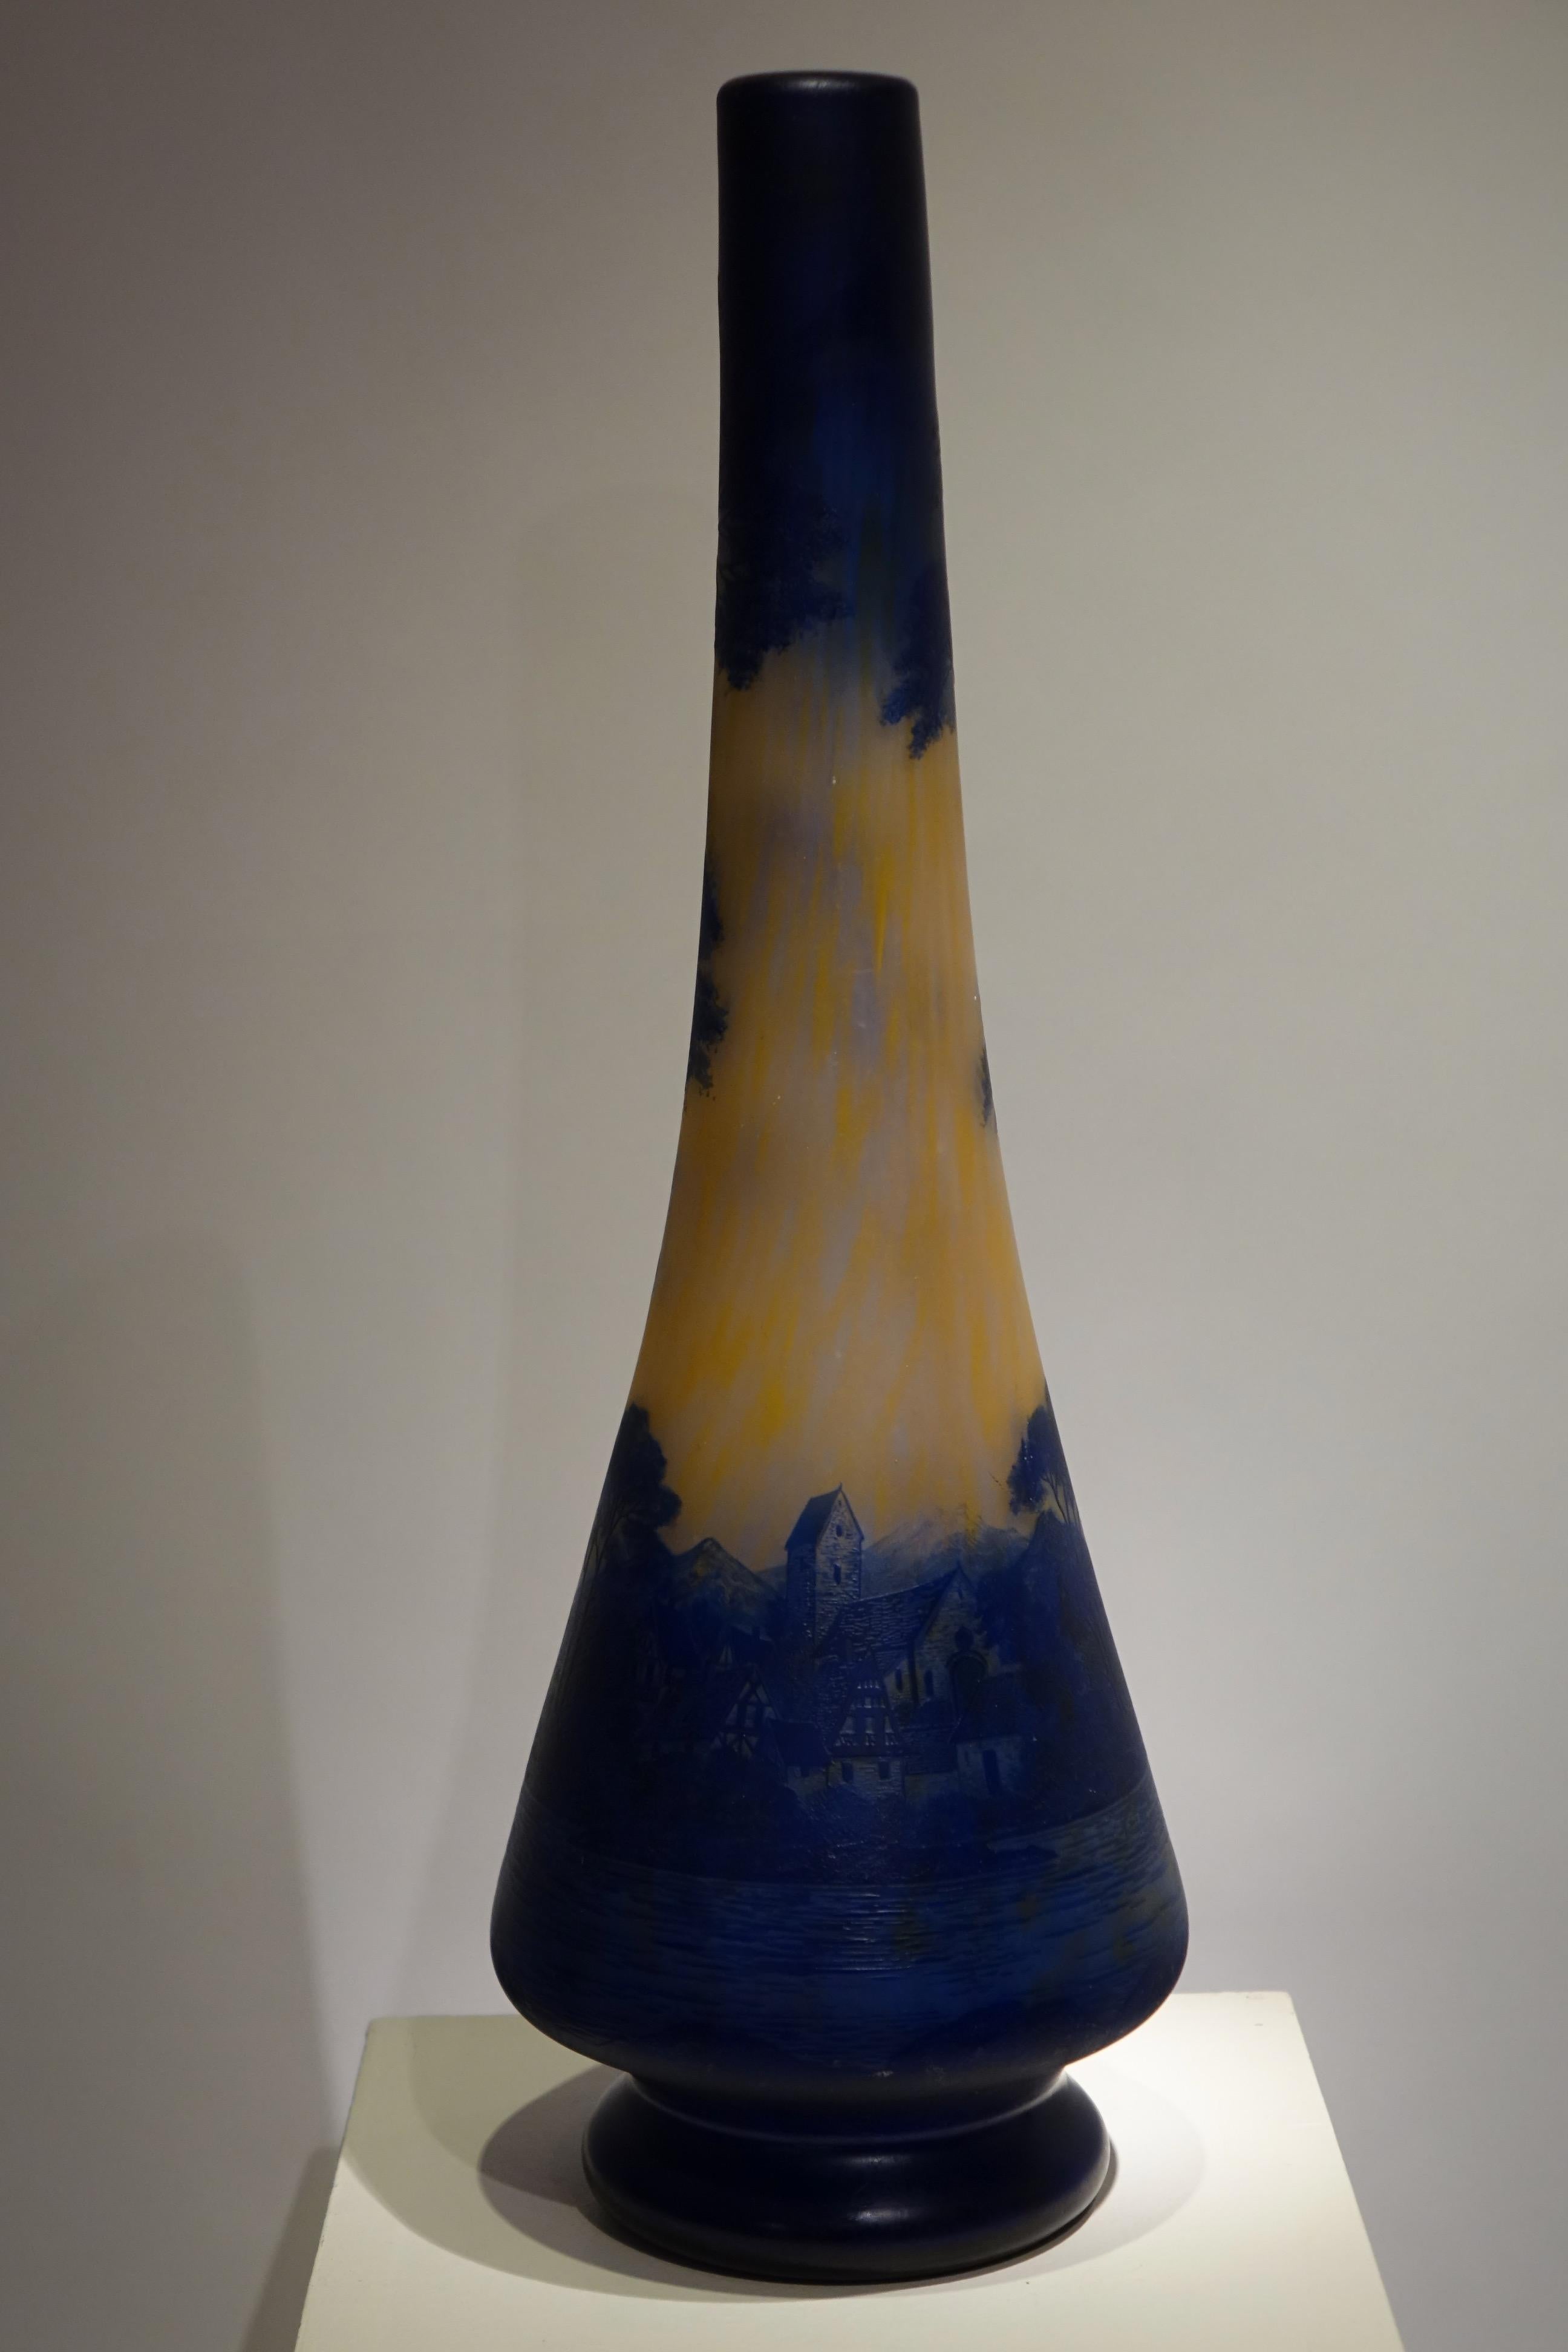 Large vase of Richard BURGSTHAL, French master glassmaker, of his true name Rene BILLA.
From 1912, after meeting Gustave Fayet, he settled in Bièvres and developed his own furnace, using the works of the monk Théophile, dating from 1125. He